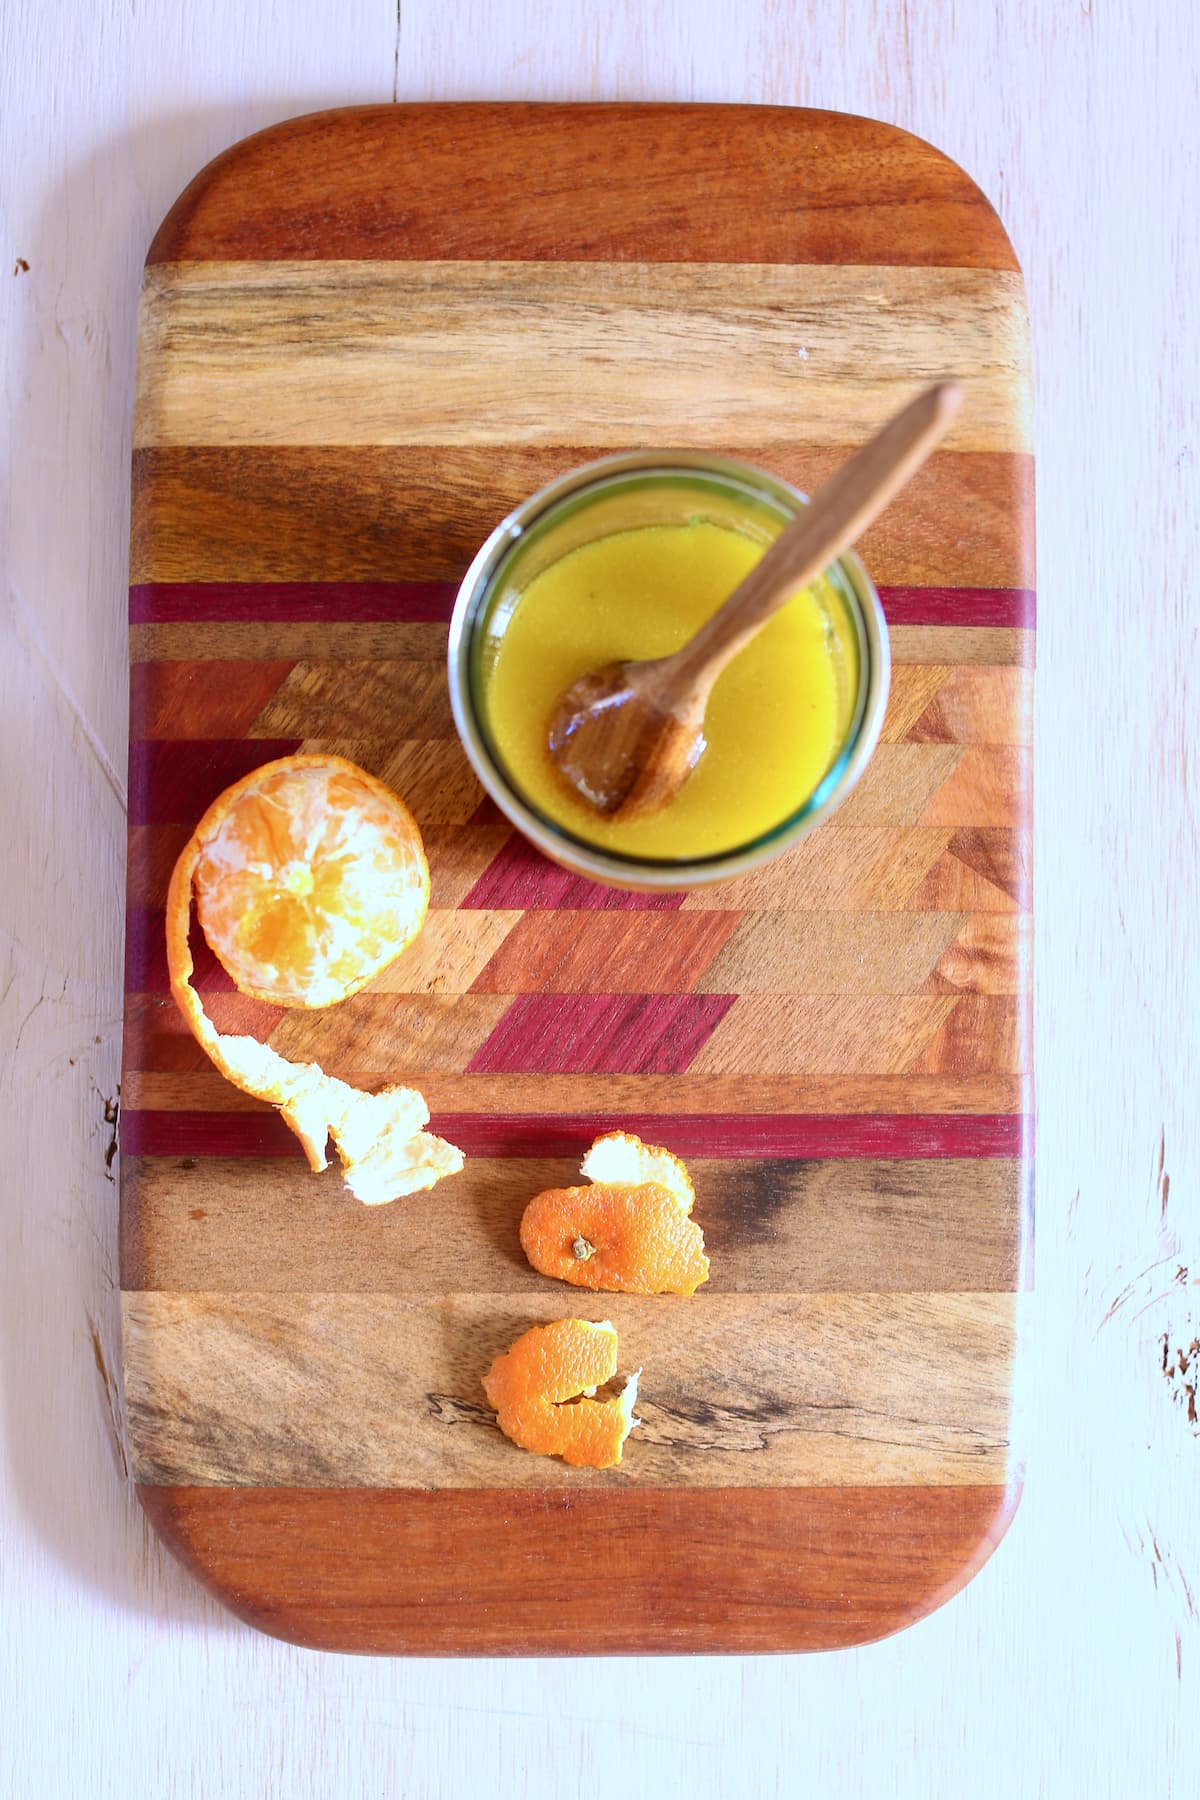 a cutting board with a jar of vinaigrette on it and an orange.